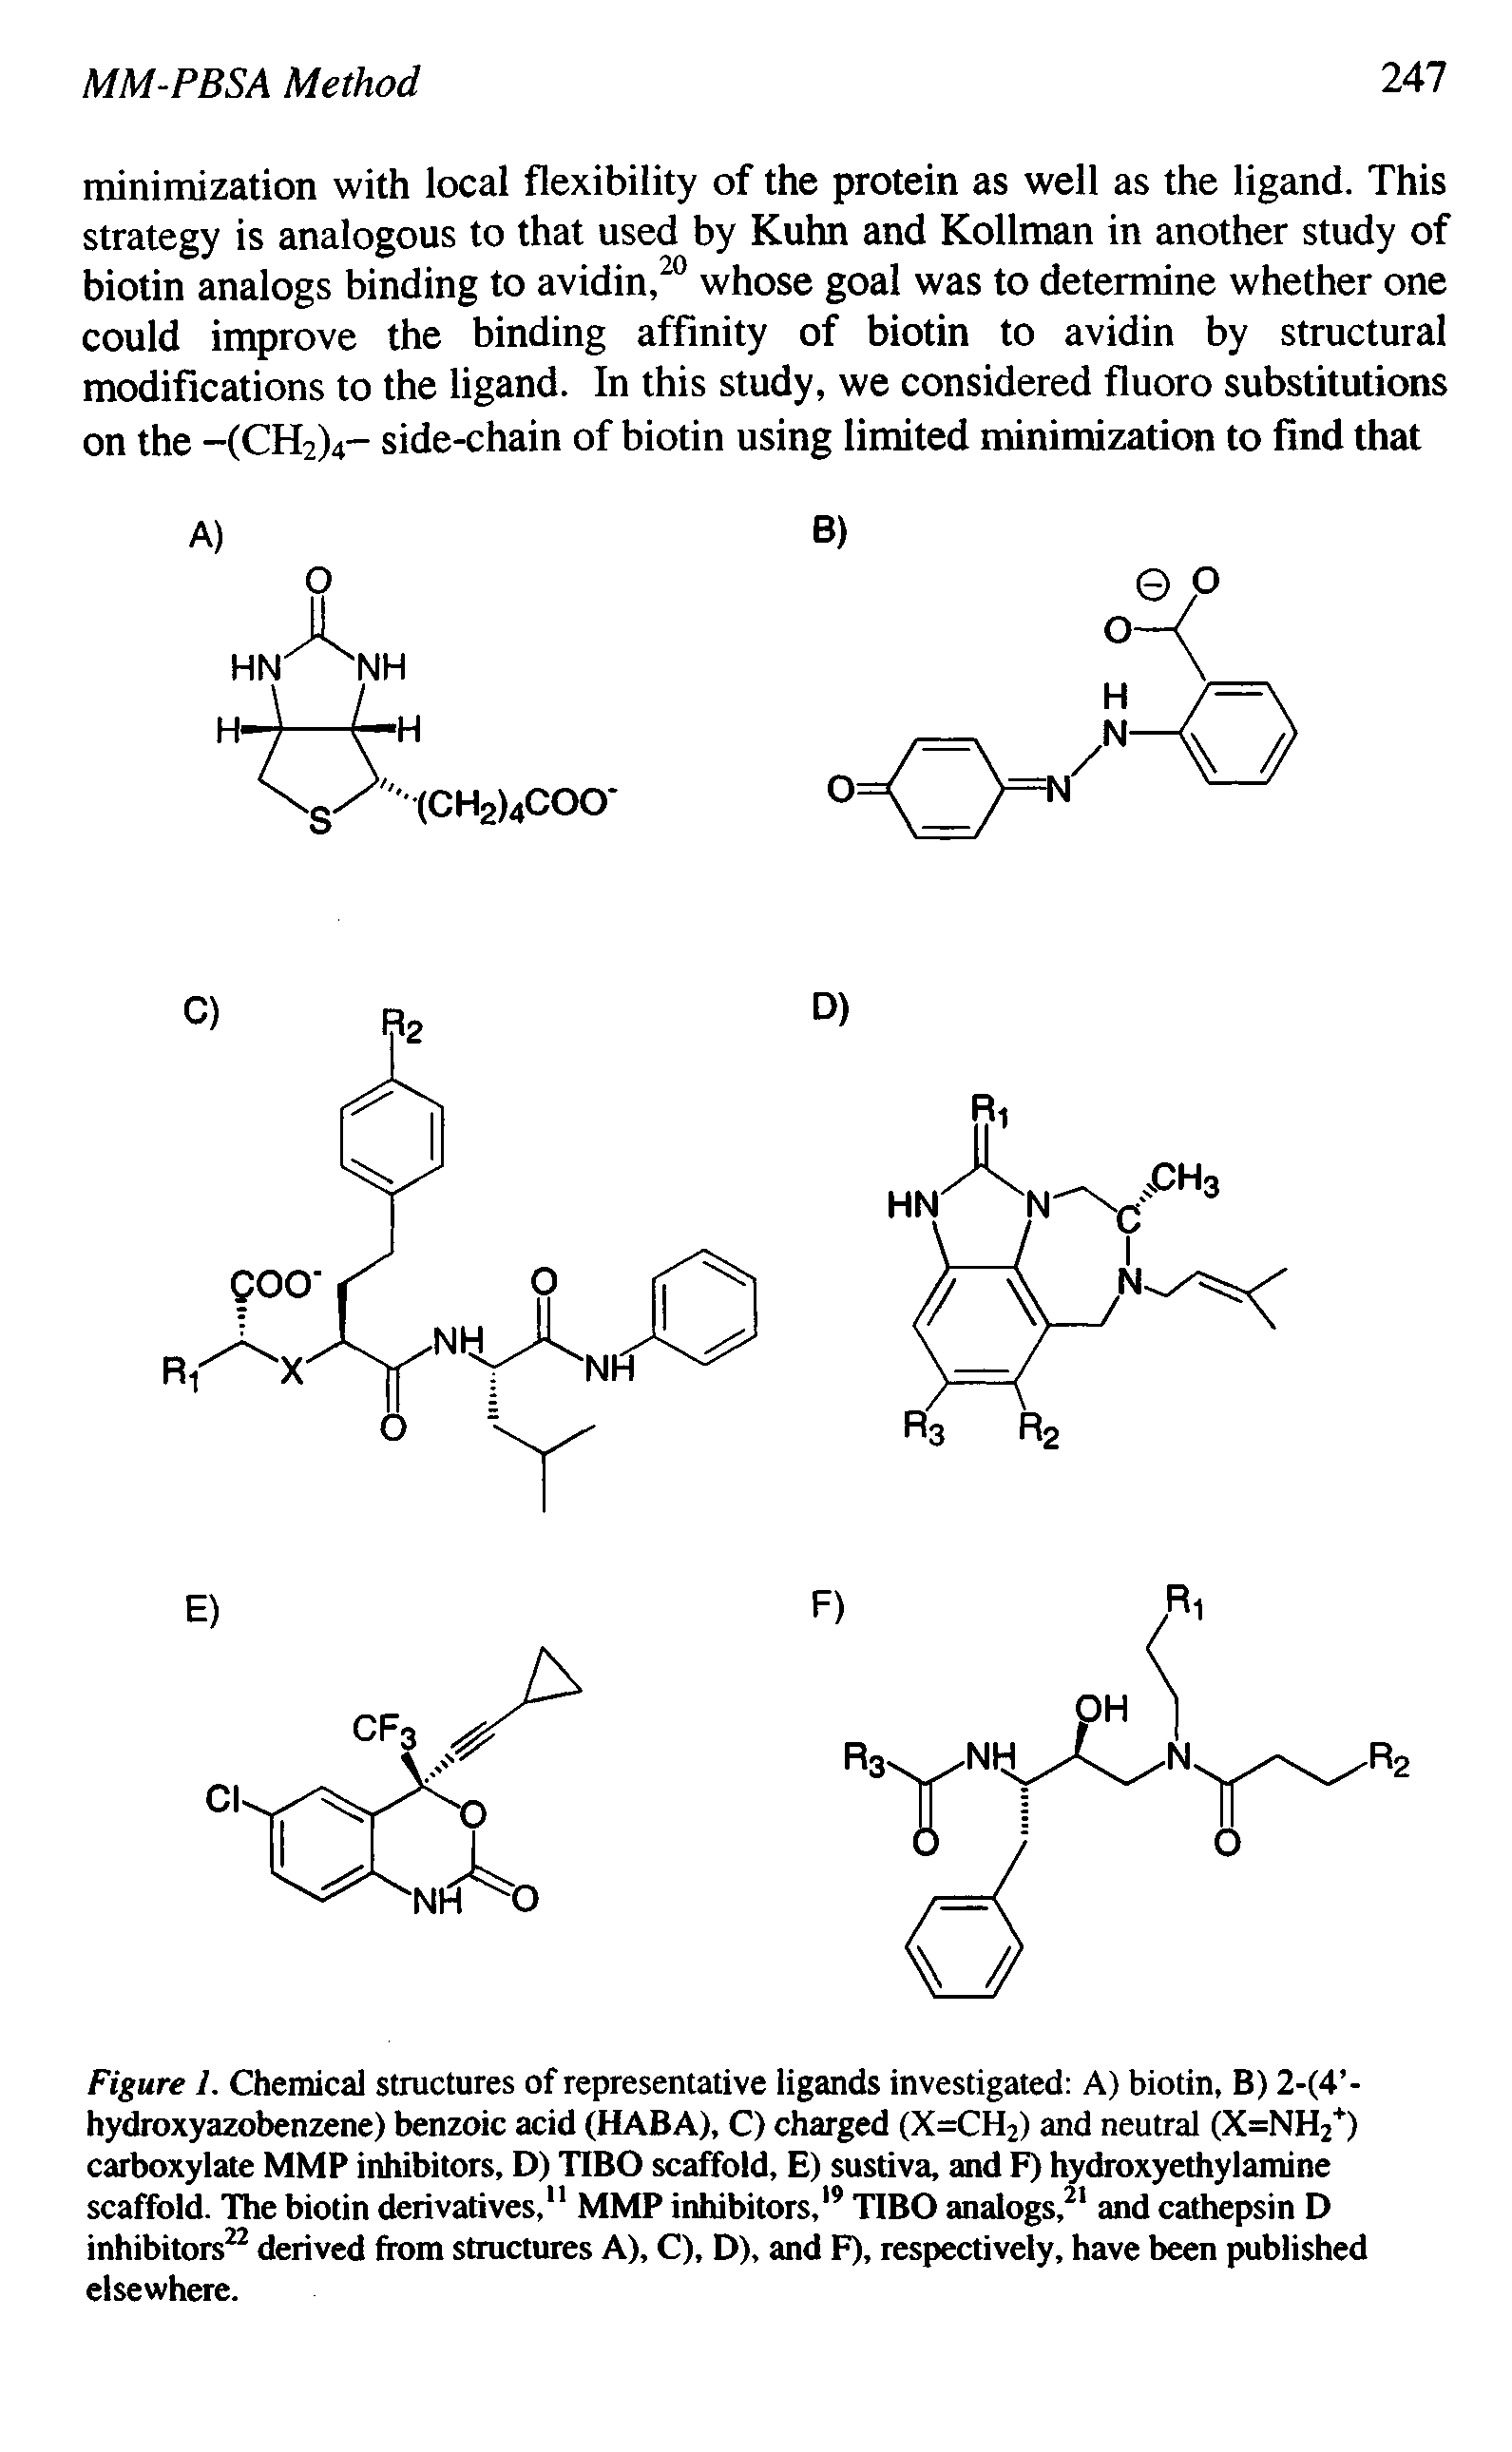 Figure I. Chemical structures of representative ligands investigated A) biotin, B) 2-(4 -hydroxyazobenzene) benzoic acid (HABA), C) charged (X=CH2) and neutral (X=NH2 ) carboxylate MMP inhibitors, D) TtBO scaffold, E) sustiva, and F) hydroxyethylamine scaffold. The biotin derivatives," MMP inhibitors, TIBO analogs, and cathepsin D inhibitors derived from structures A), C), D), and F), respectively, have been published elsewhere.